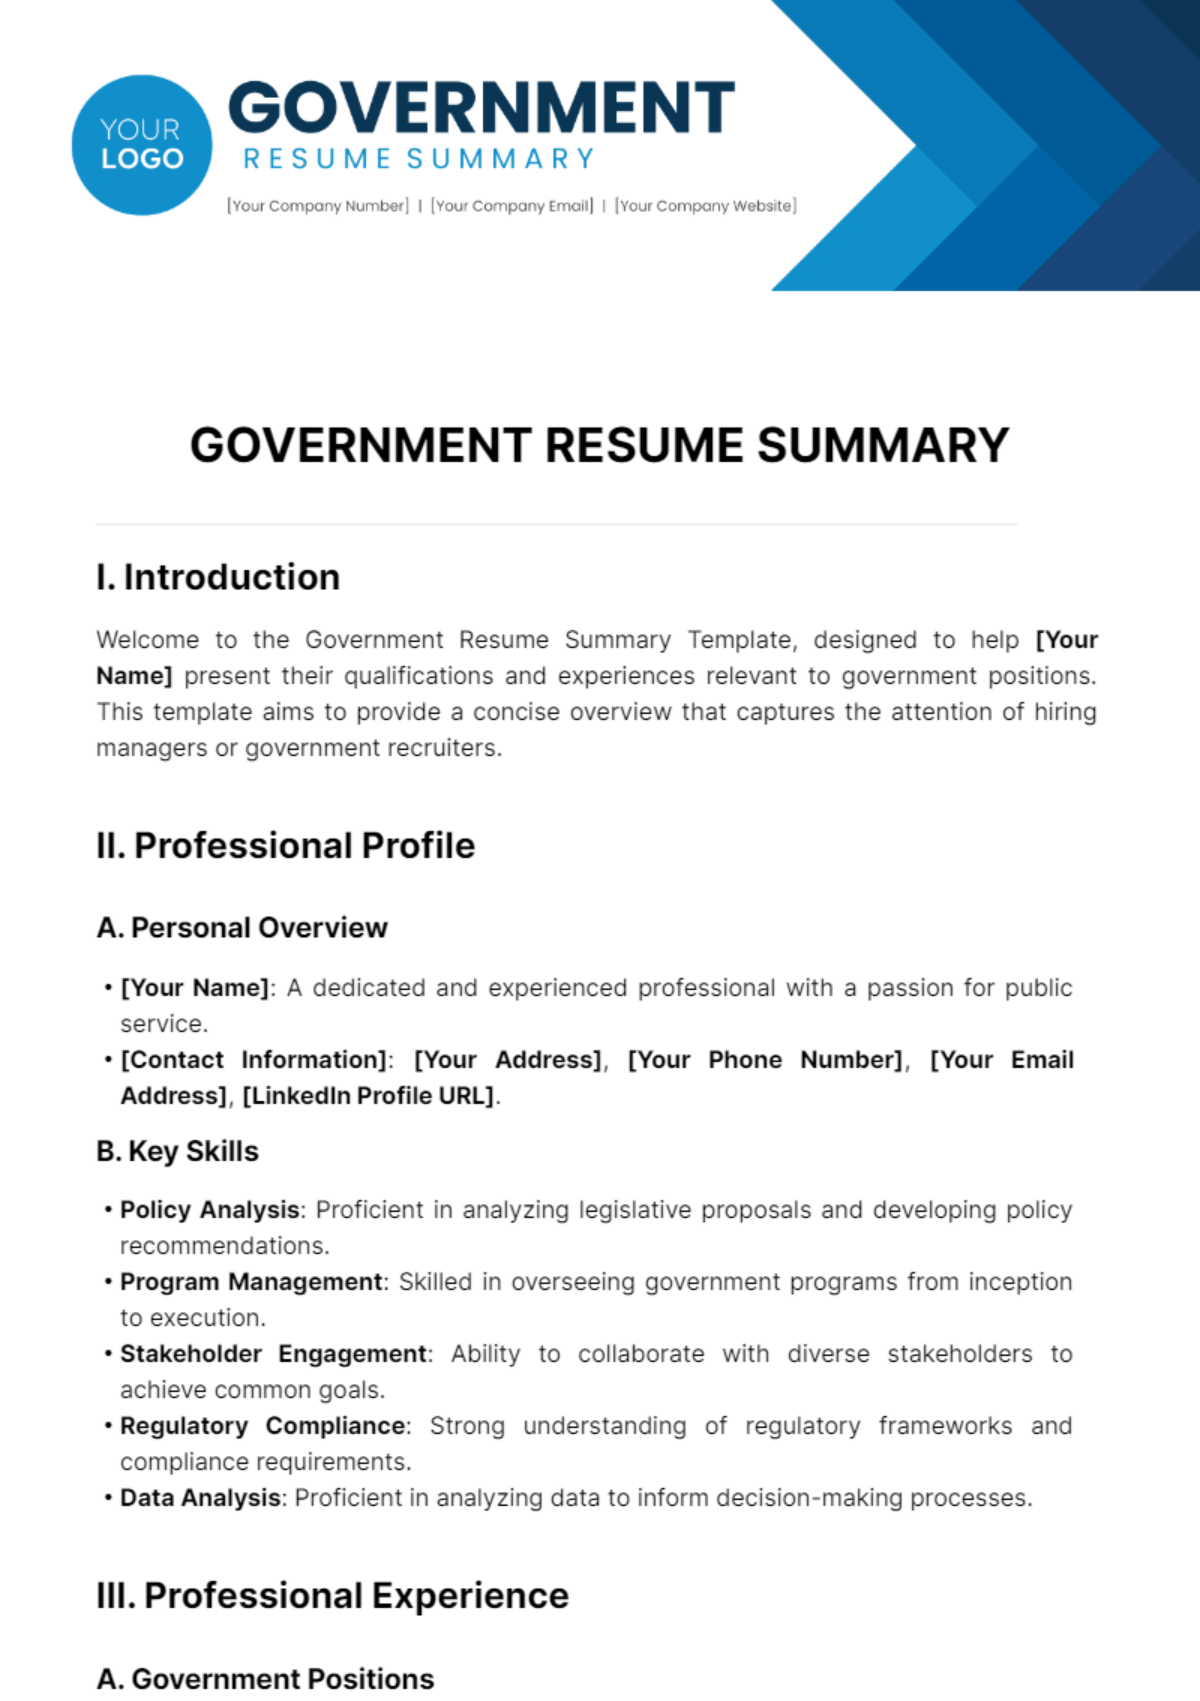 Government Resume Summary Template